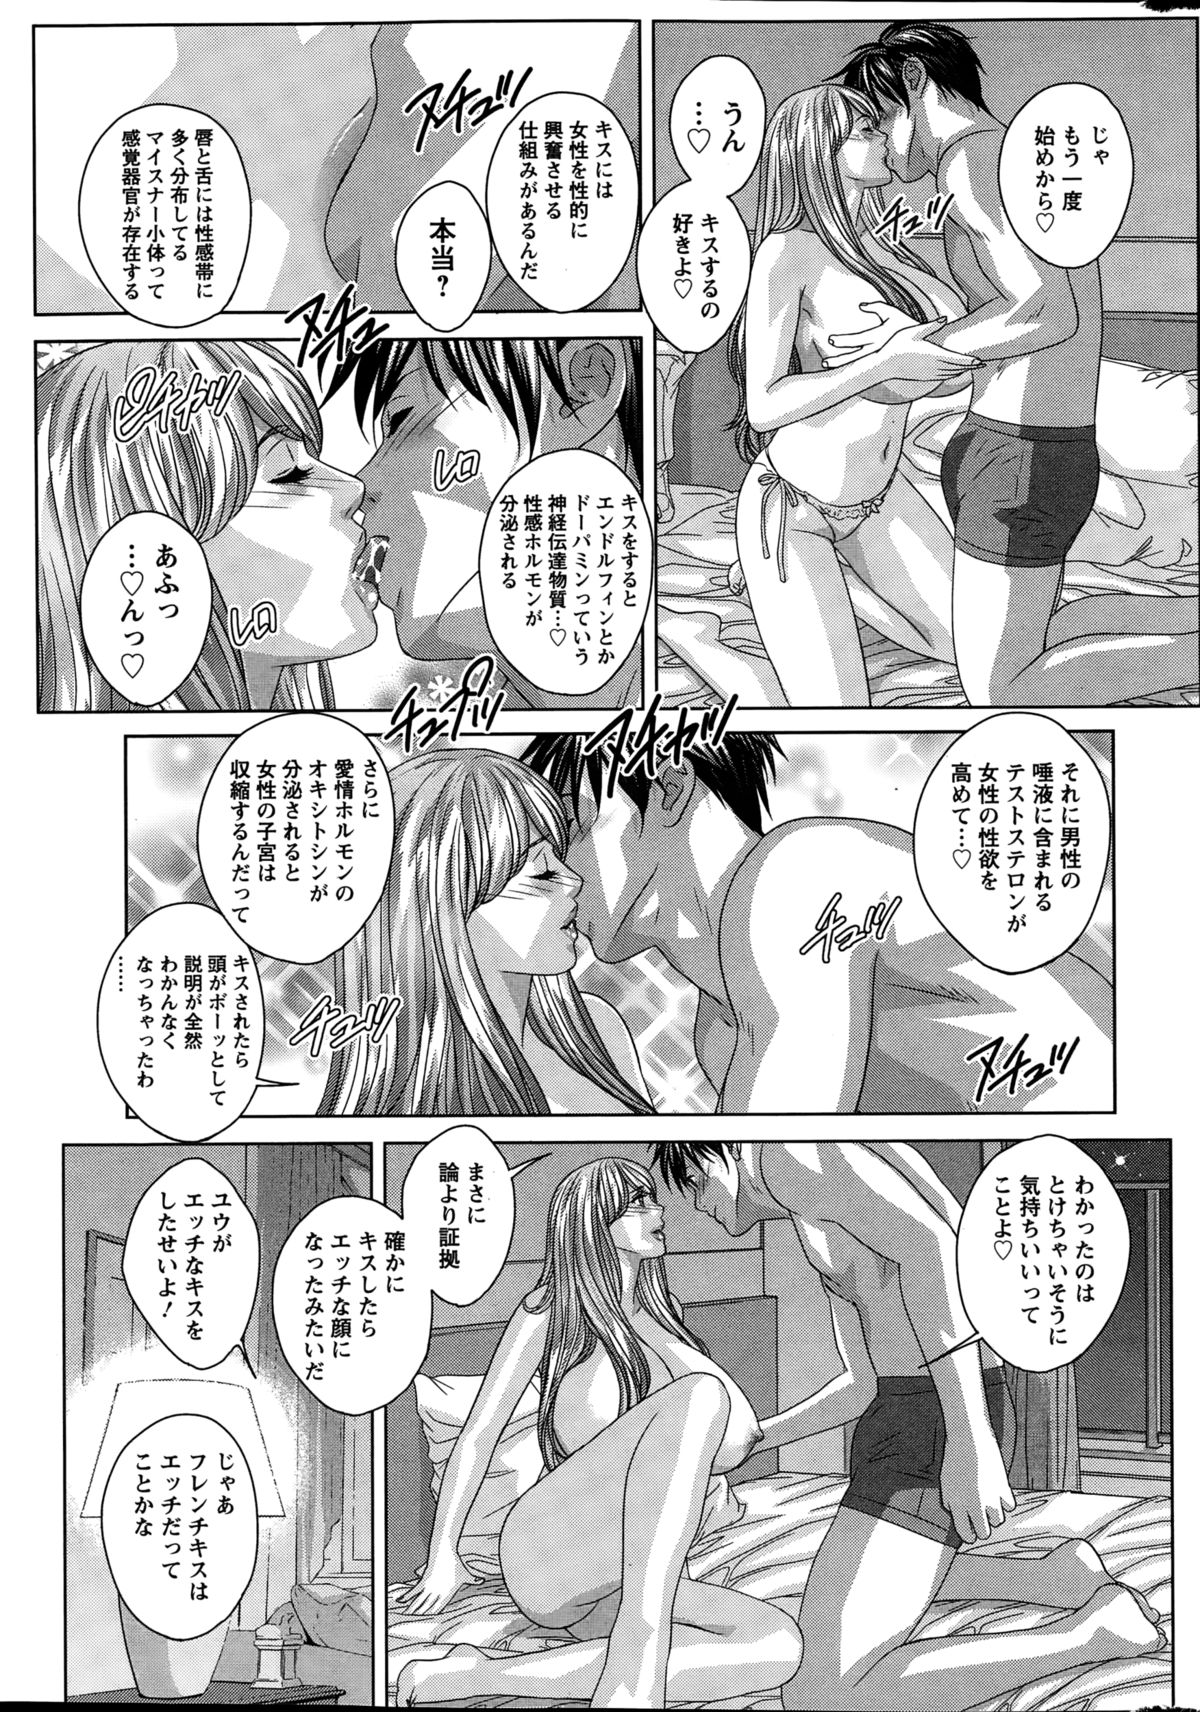 Action Pizazz 2015-01 page 11 full